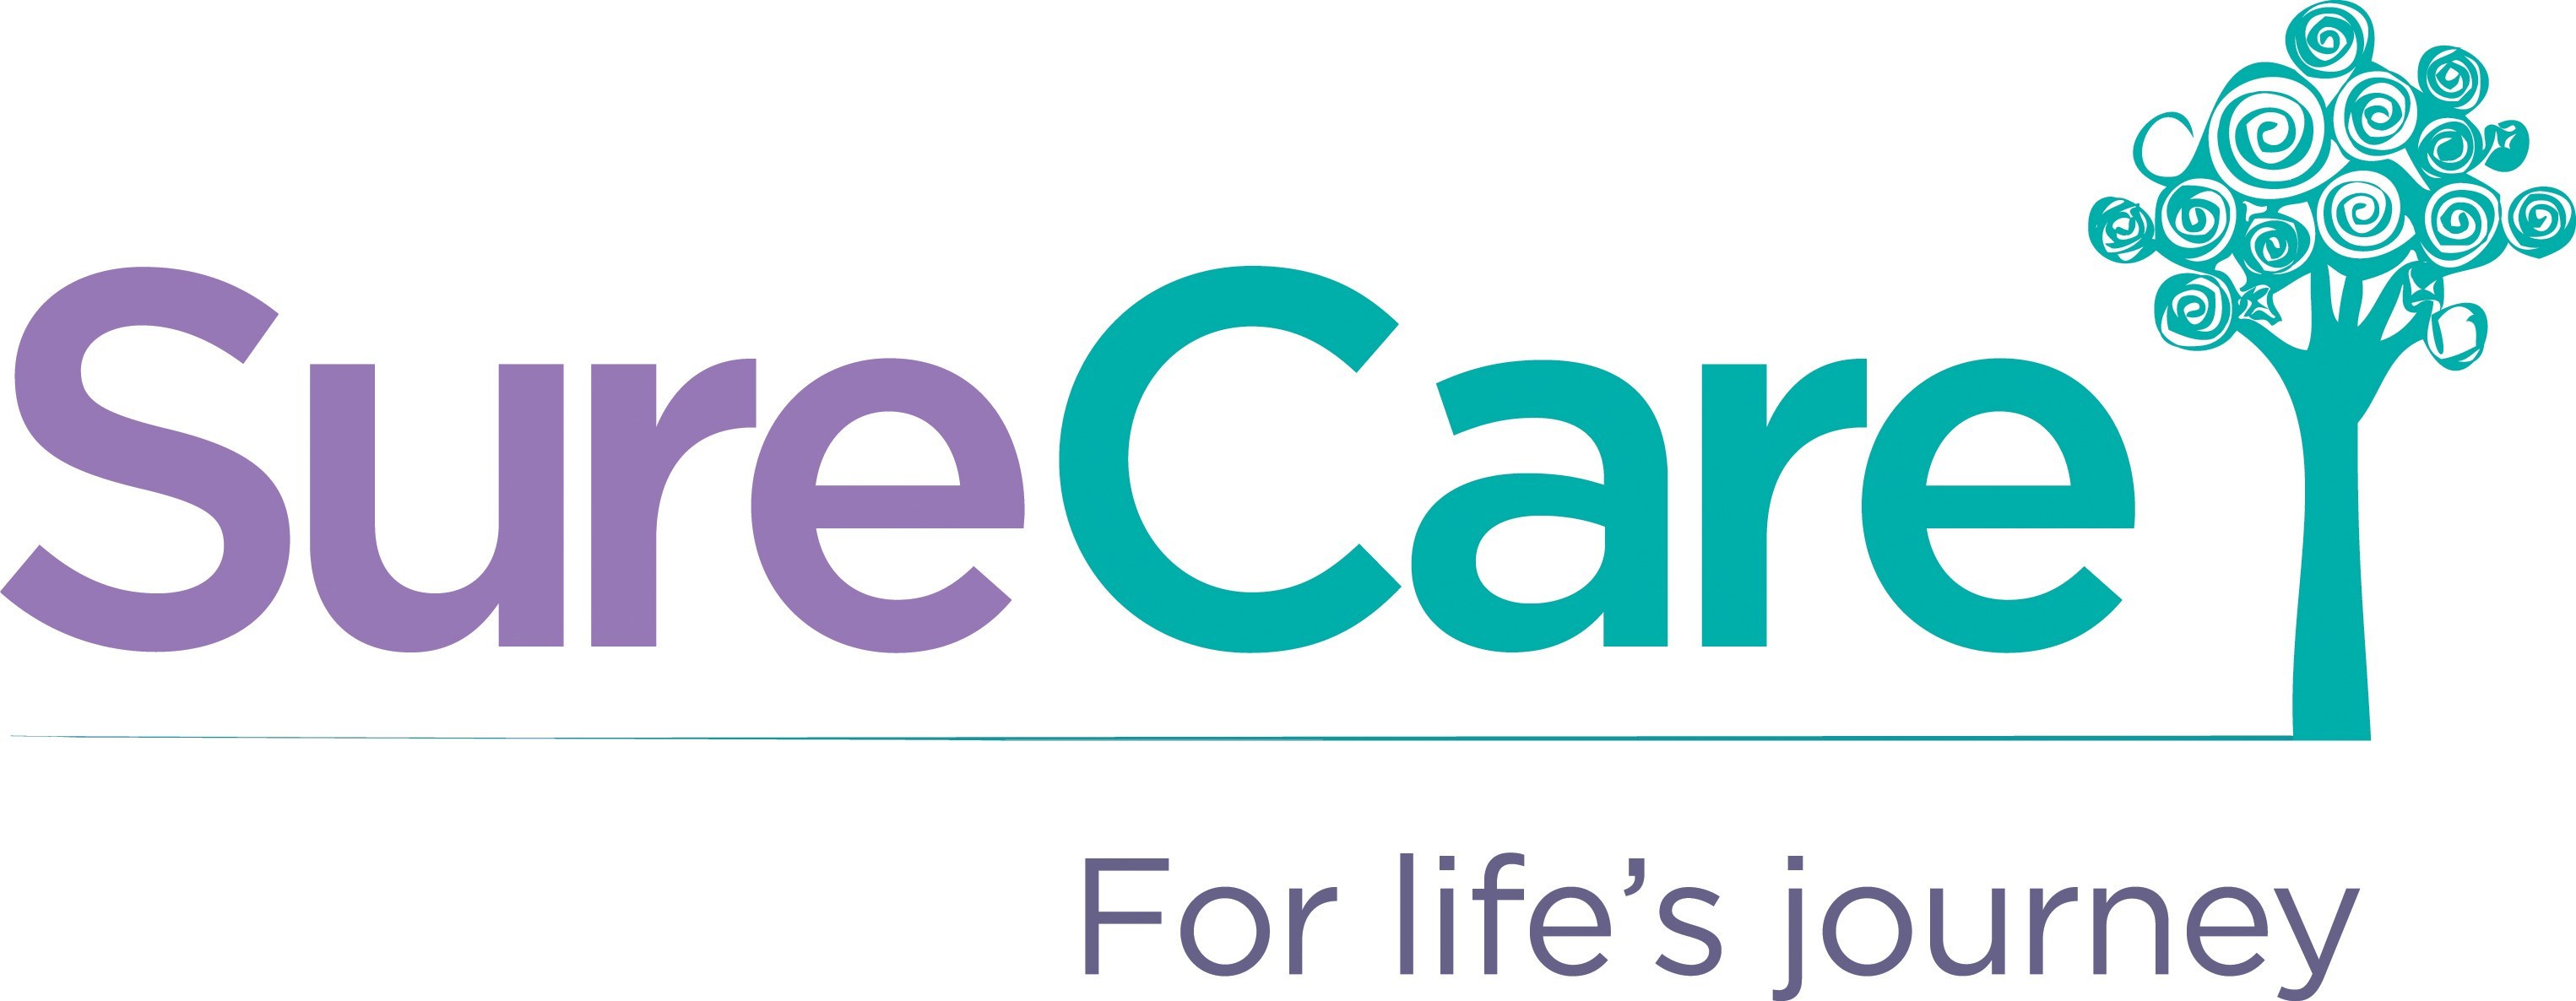 https://www.mncjobs.co.uk/company/surecare-central-cheshire-1638543407